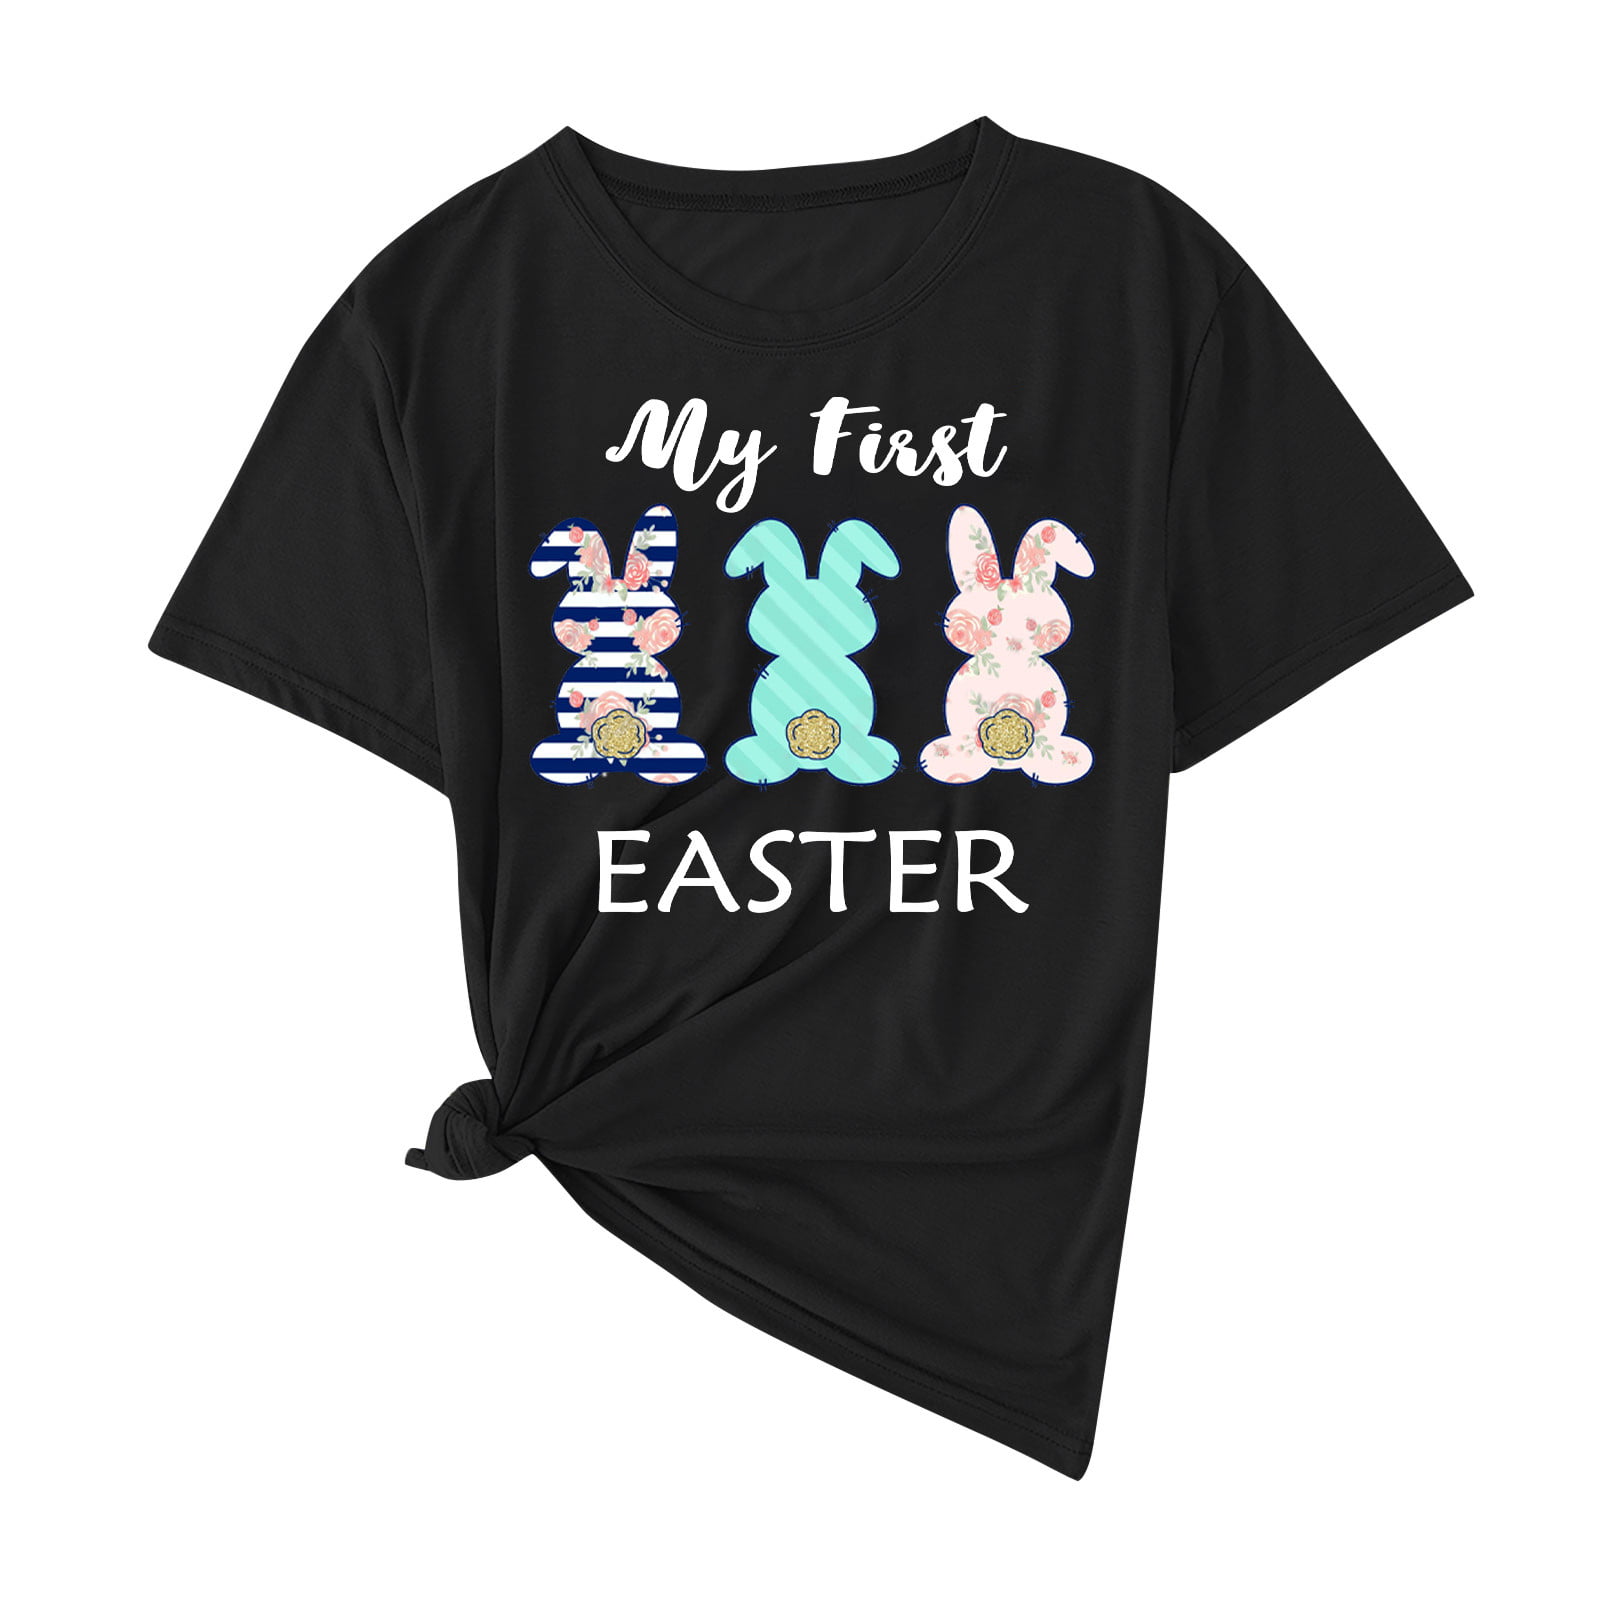 Toddler/Kids Raglan T-Shirt of Course I Have A Bestie Its My Grandpa 